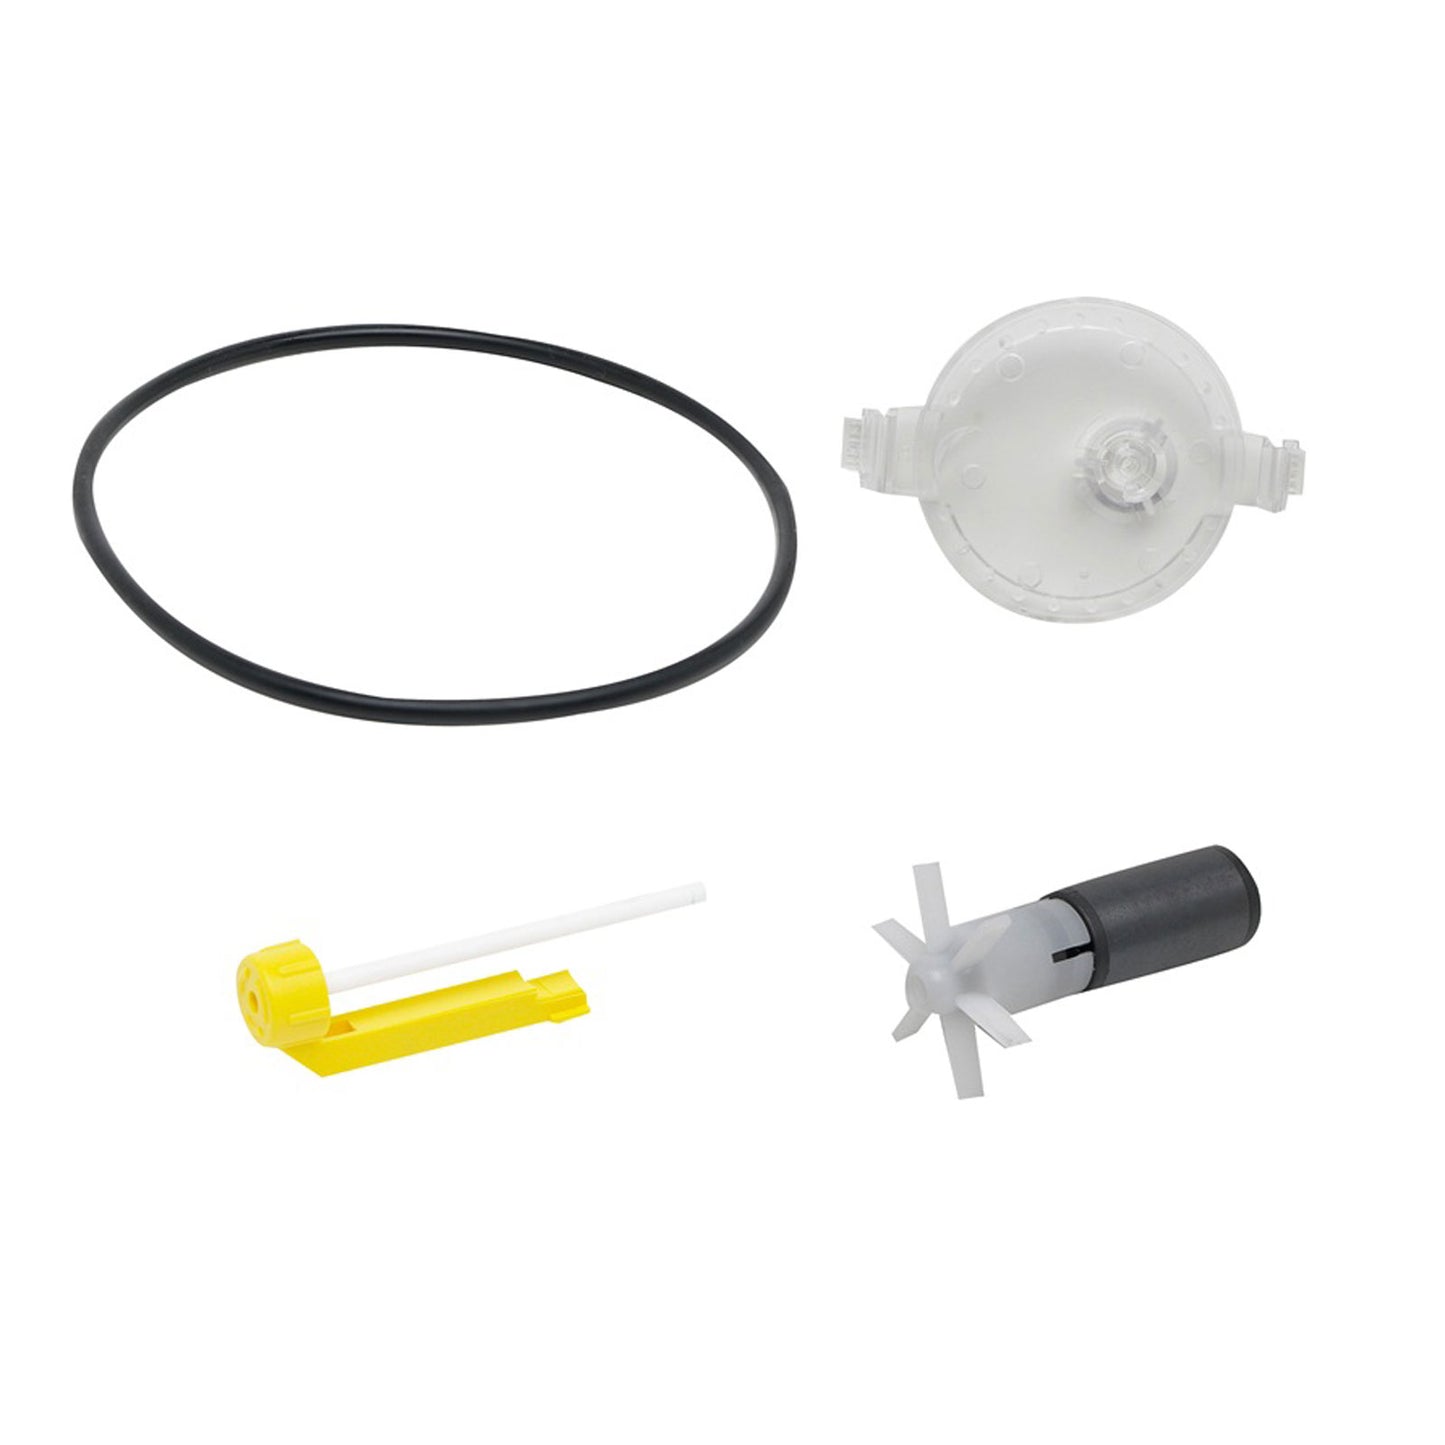 Fluval 105 Service Kit - Impeller, Cover, Seal, Shaft (A20111, A20116, A20038, A20041 & Instructions)